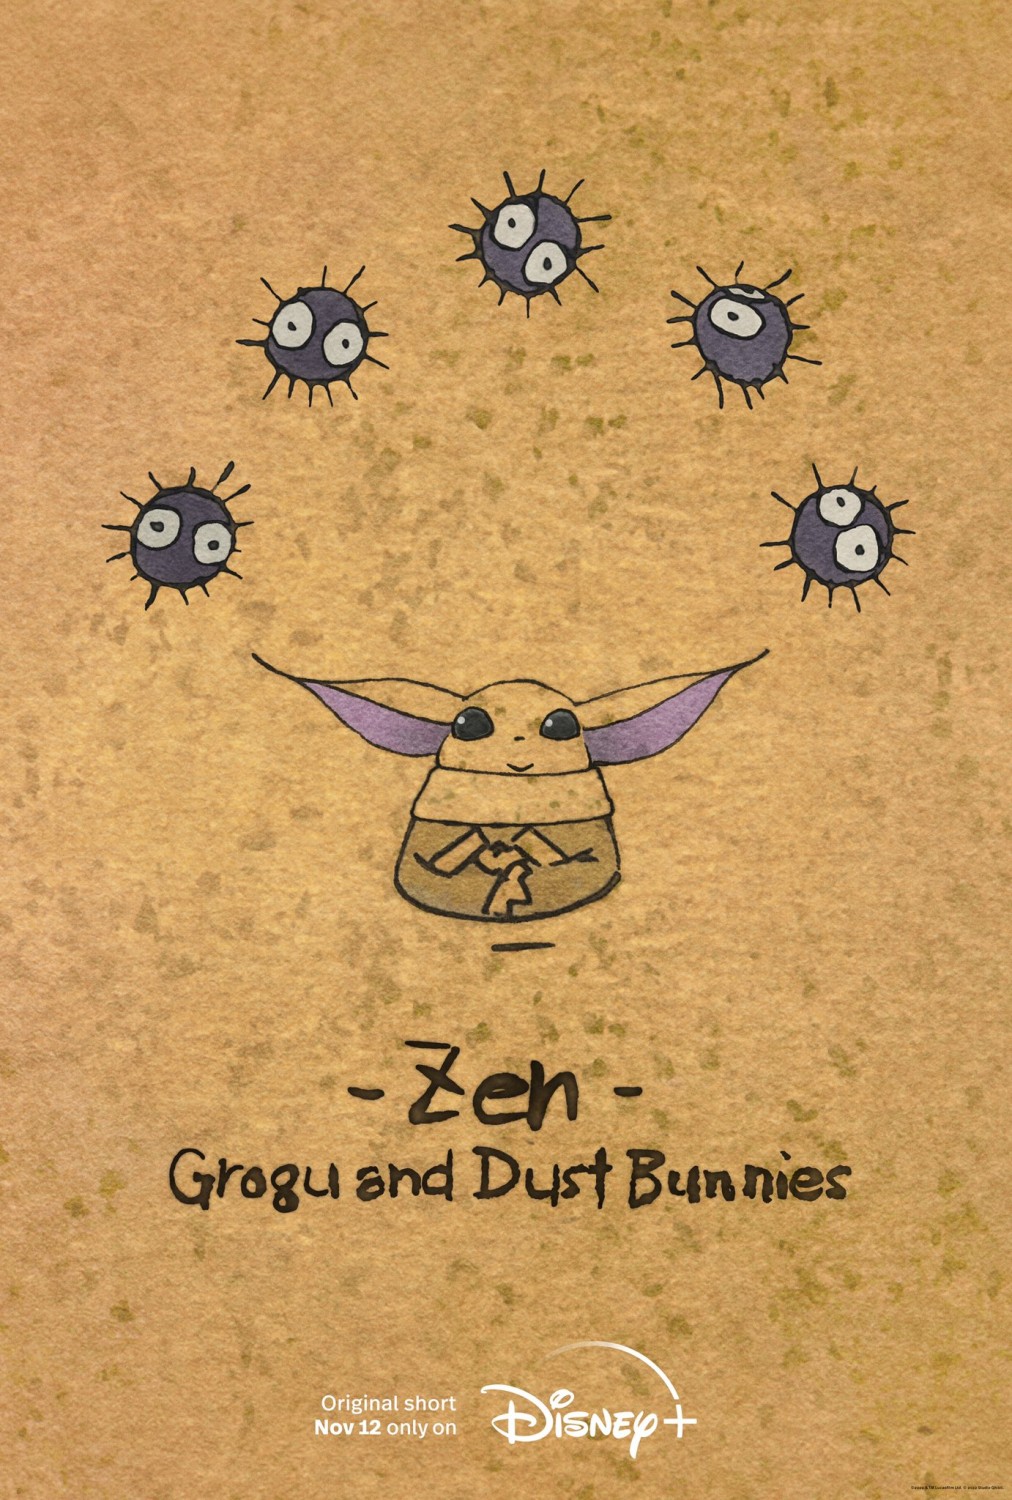 Extra Large Movie Poster Image for Zen - Grogu and Dust Bunnies